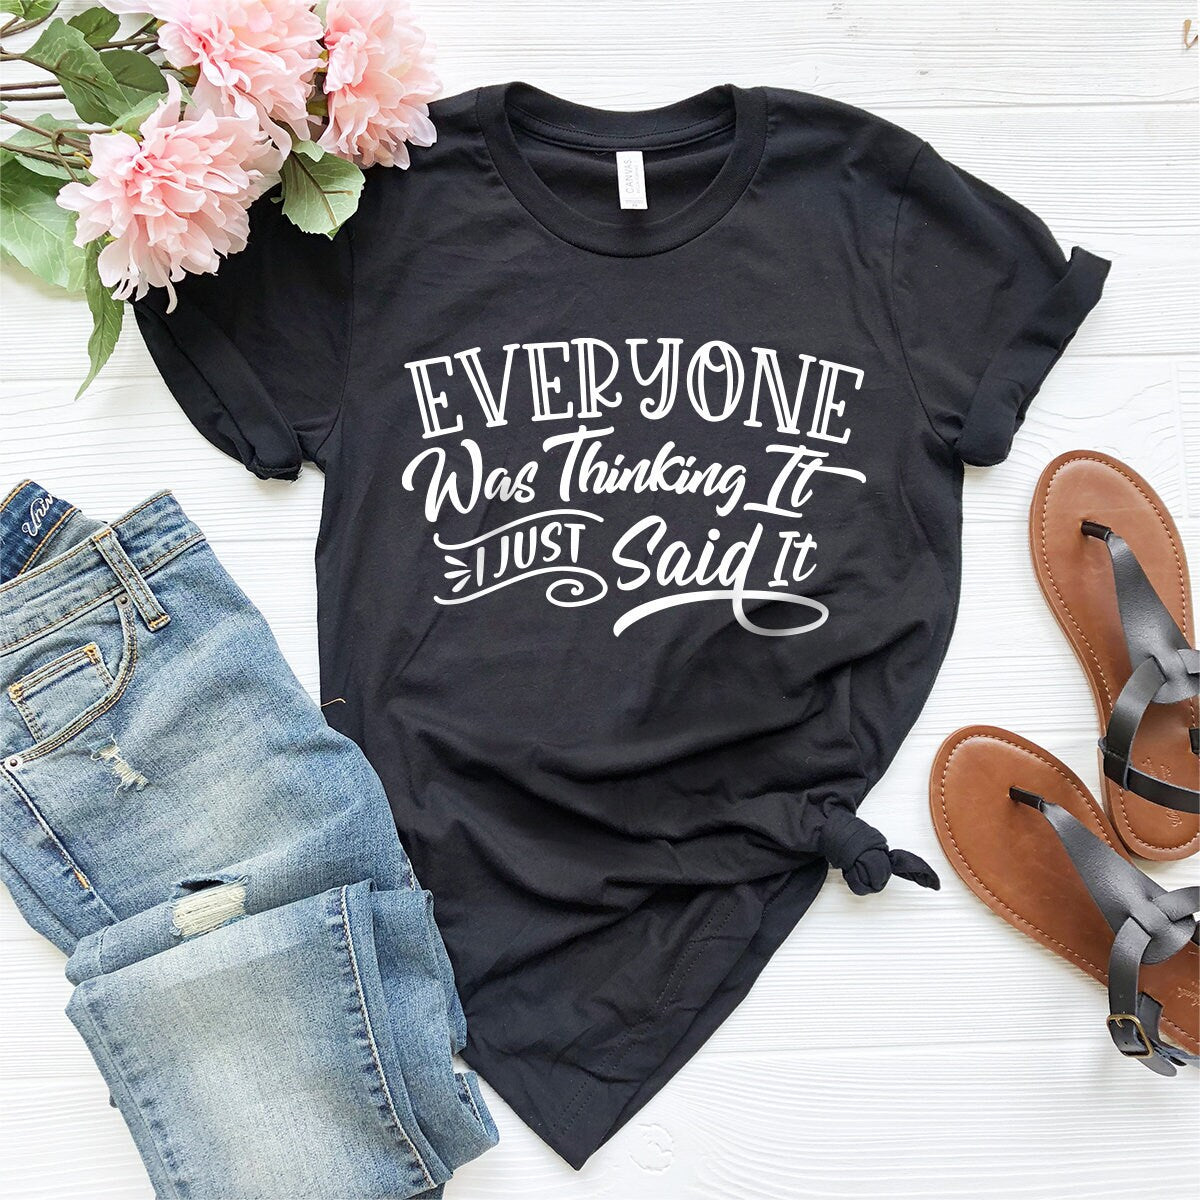 Sarcastic Shirt, Funny Quotes Shirt, Everyone Was Thinking It I Just Say It Tee, Funny Adult Shirt, Sarcastic T-shirt, Sarcastic Quote Shirt - Fastdeliverytees.com